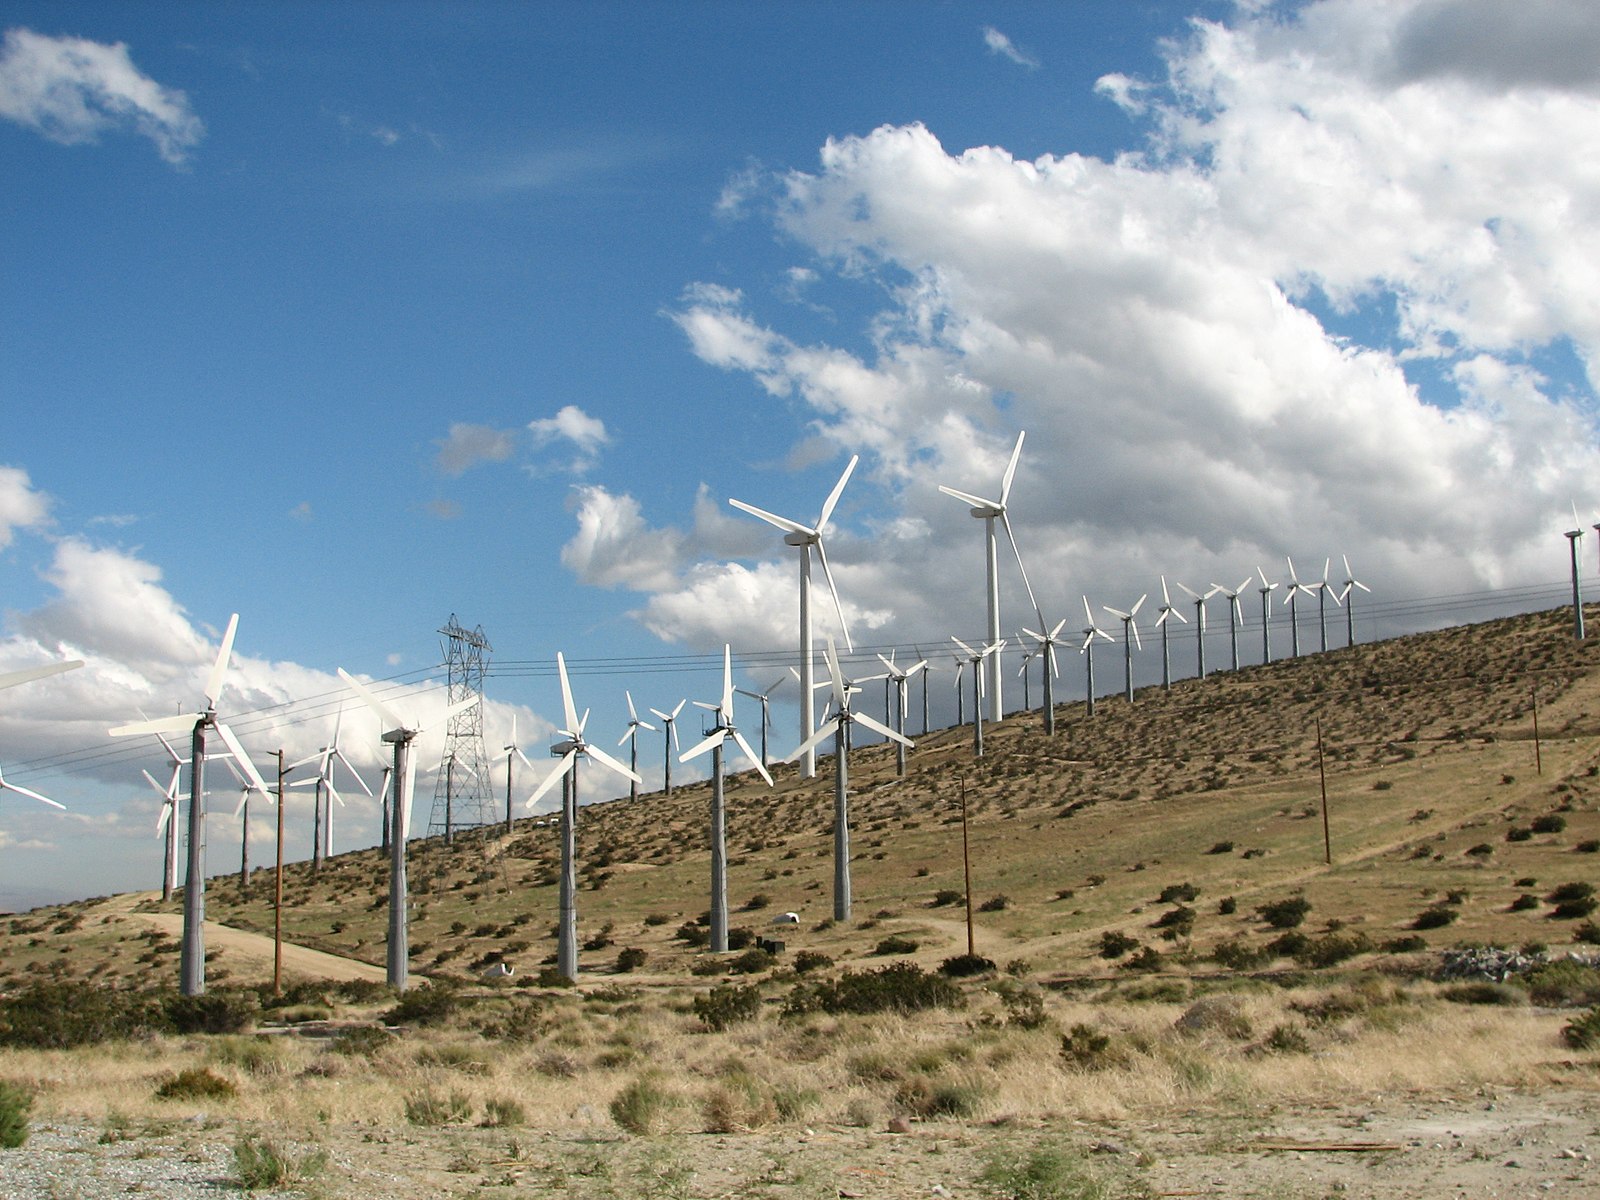 Dozens of wind turbines installed on a dried grassy hill against a blue sky